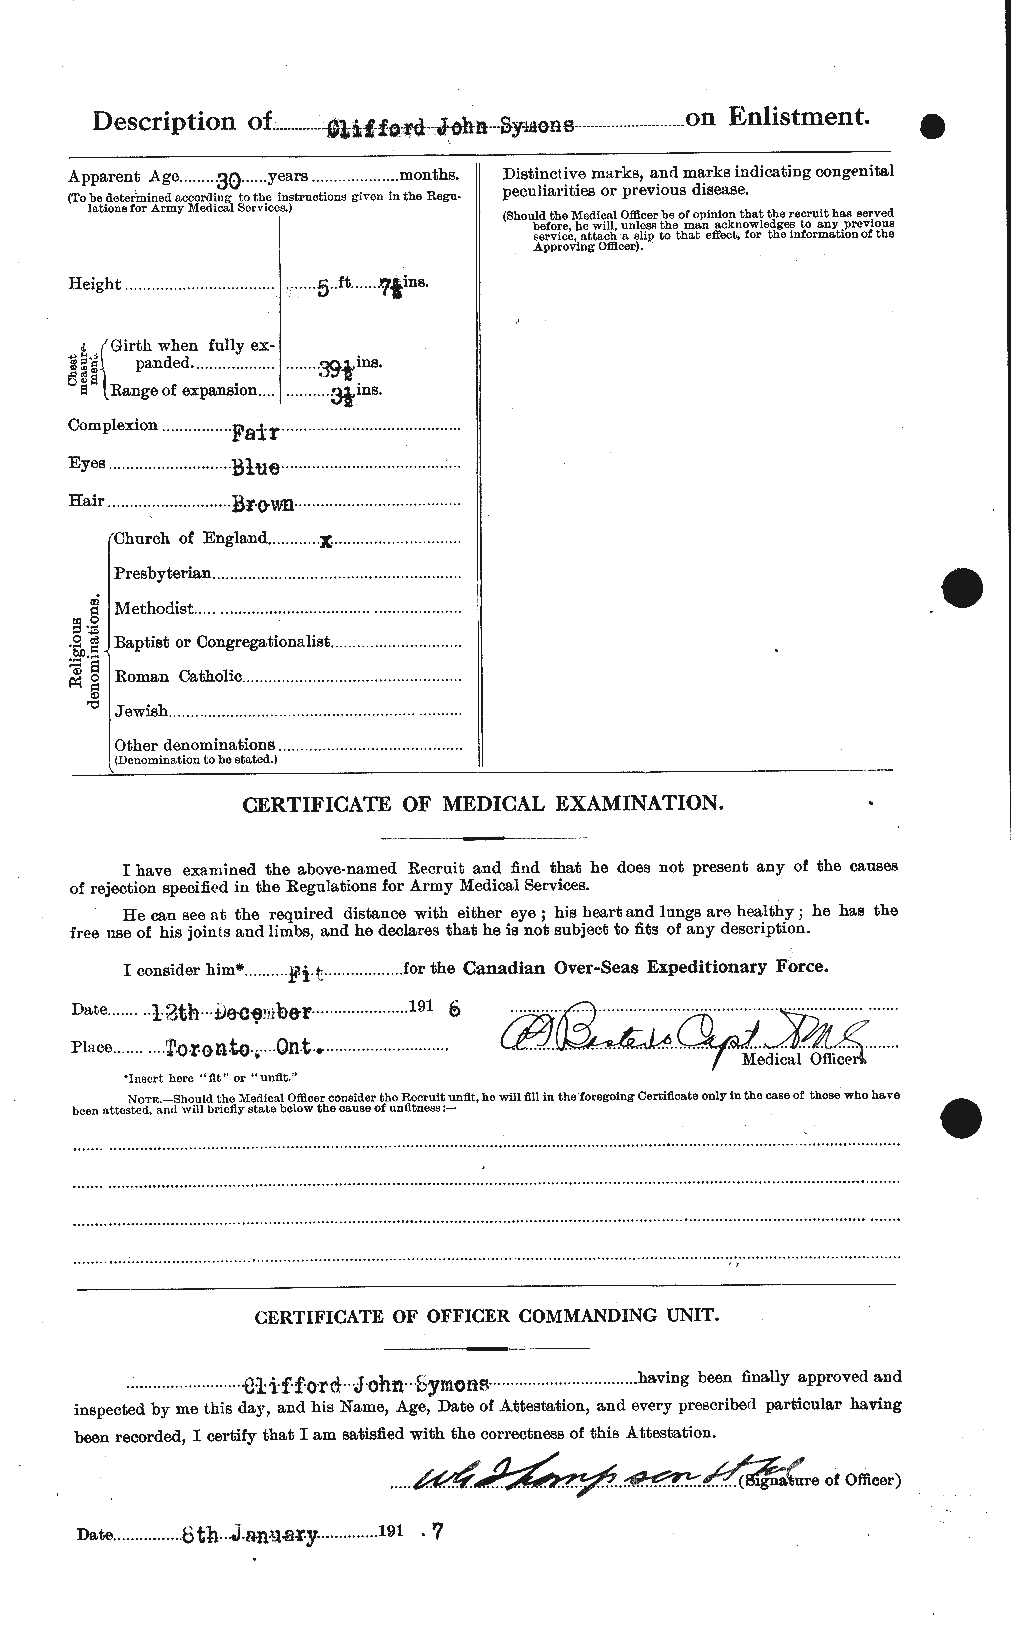 Personnel Records of the First World War - CEF 129176b